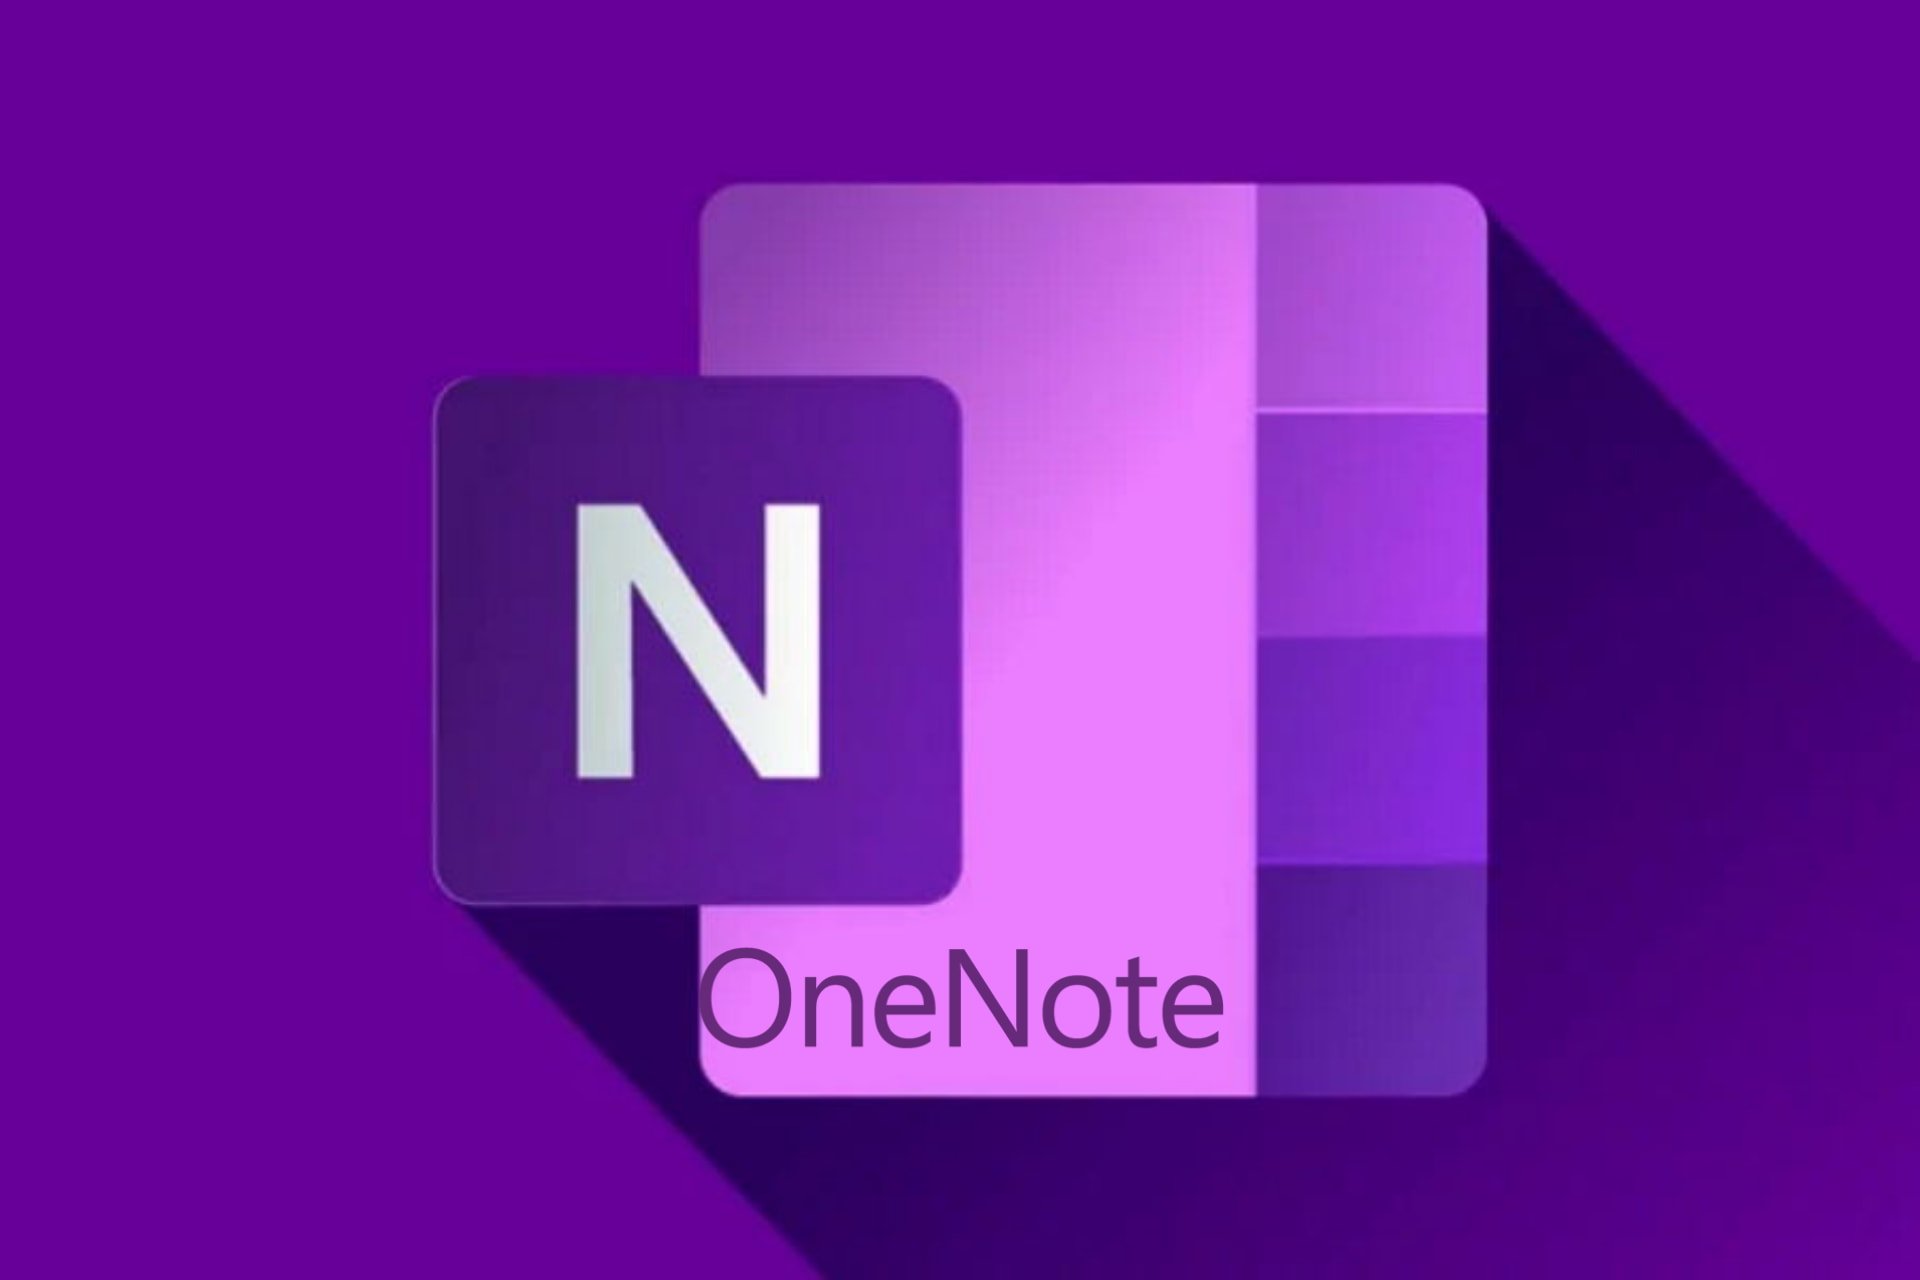 How to enable OneNote in Windows 11